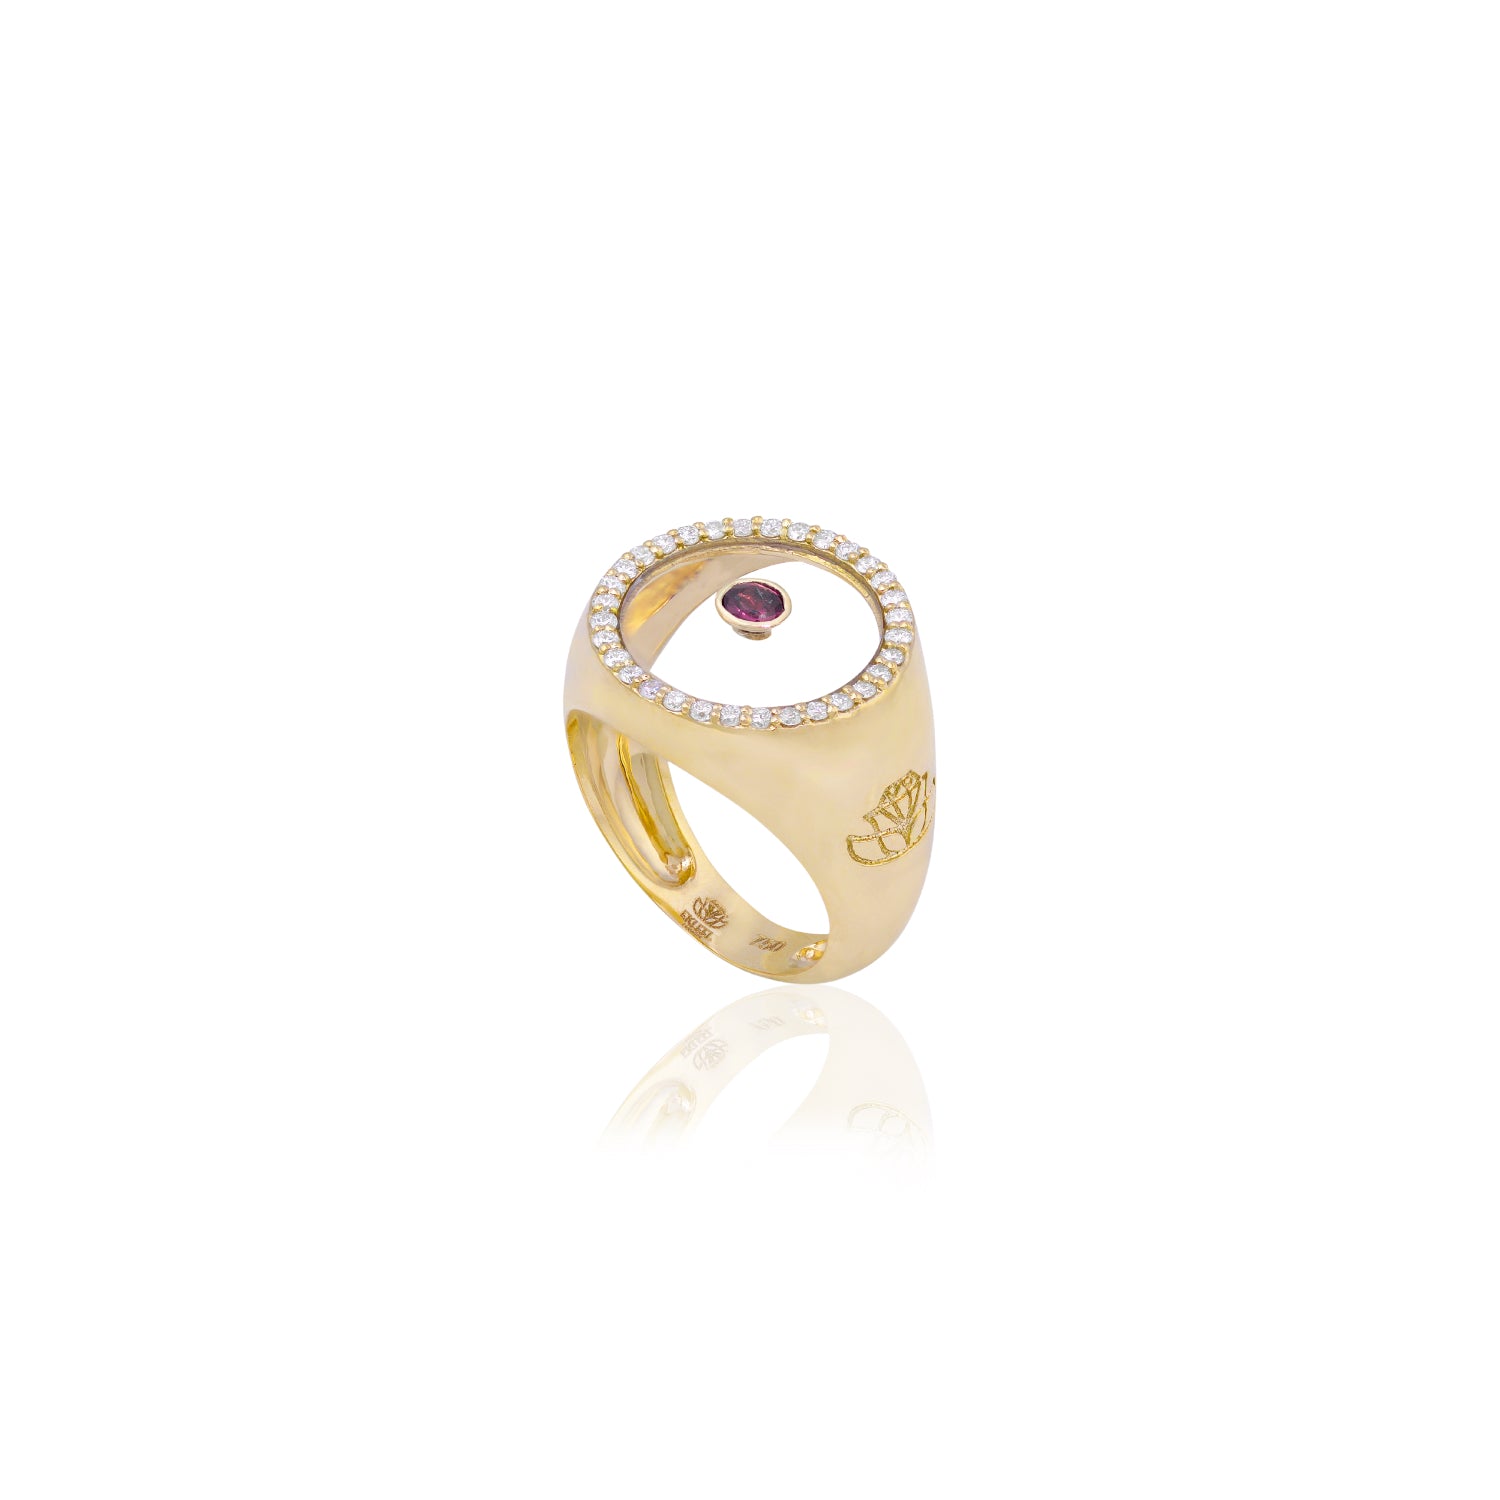 Tourmaline October Birthstone Ring in Yellow Gold